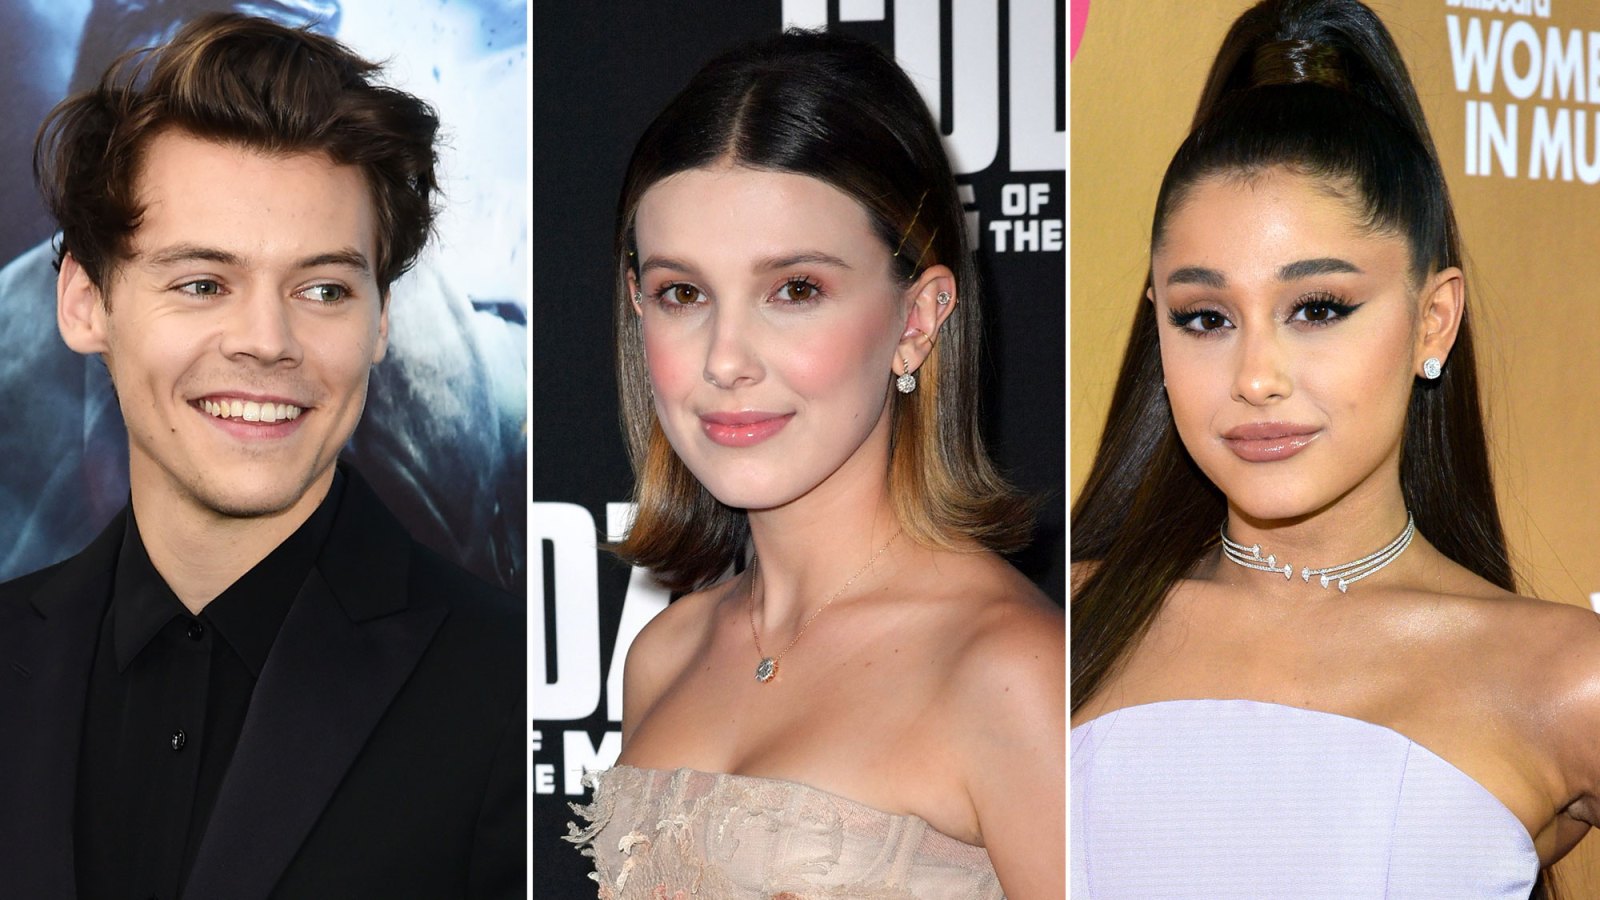 Harry Styles and Millie Bobby Brown Dance at Ariana Grande's Concert